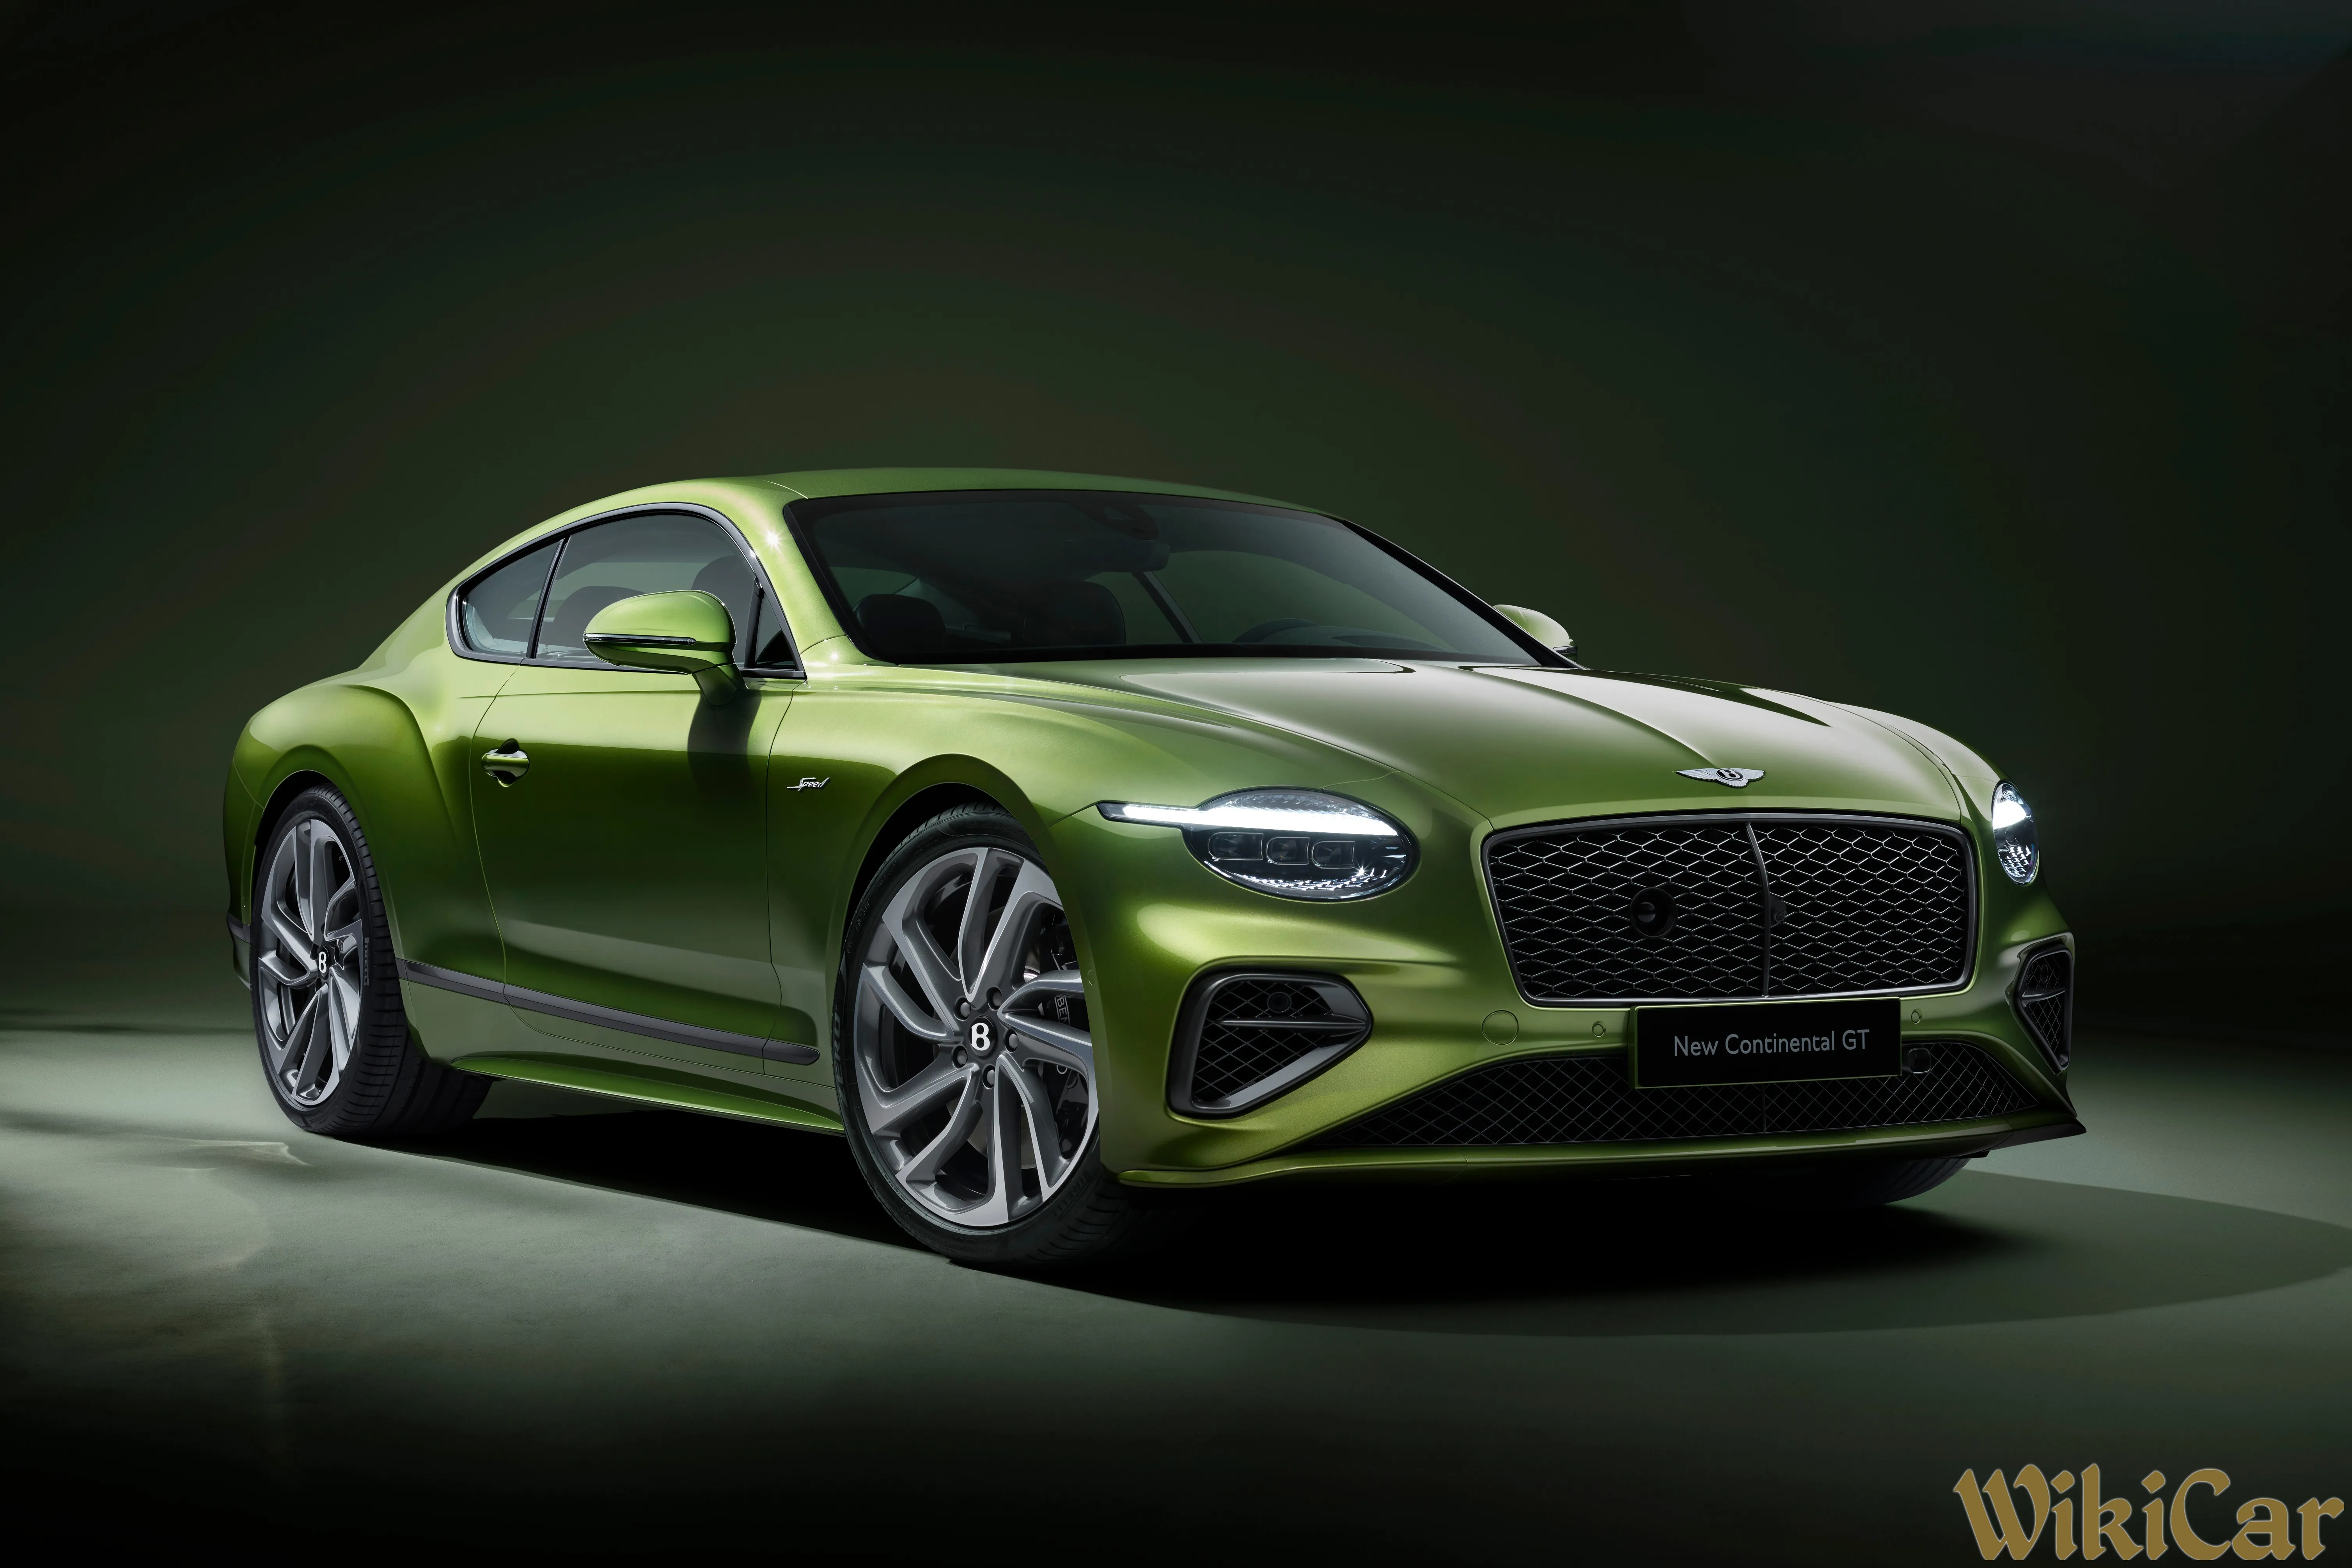 New generation Bentley Continental GT launched, nearly 800 horsepower